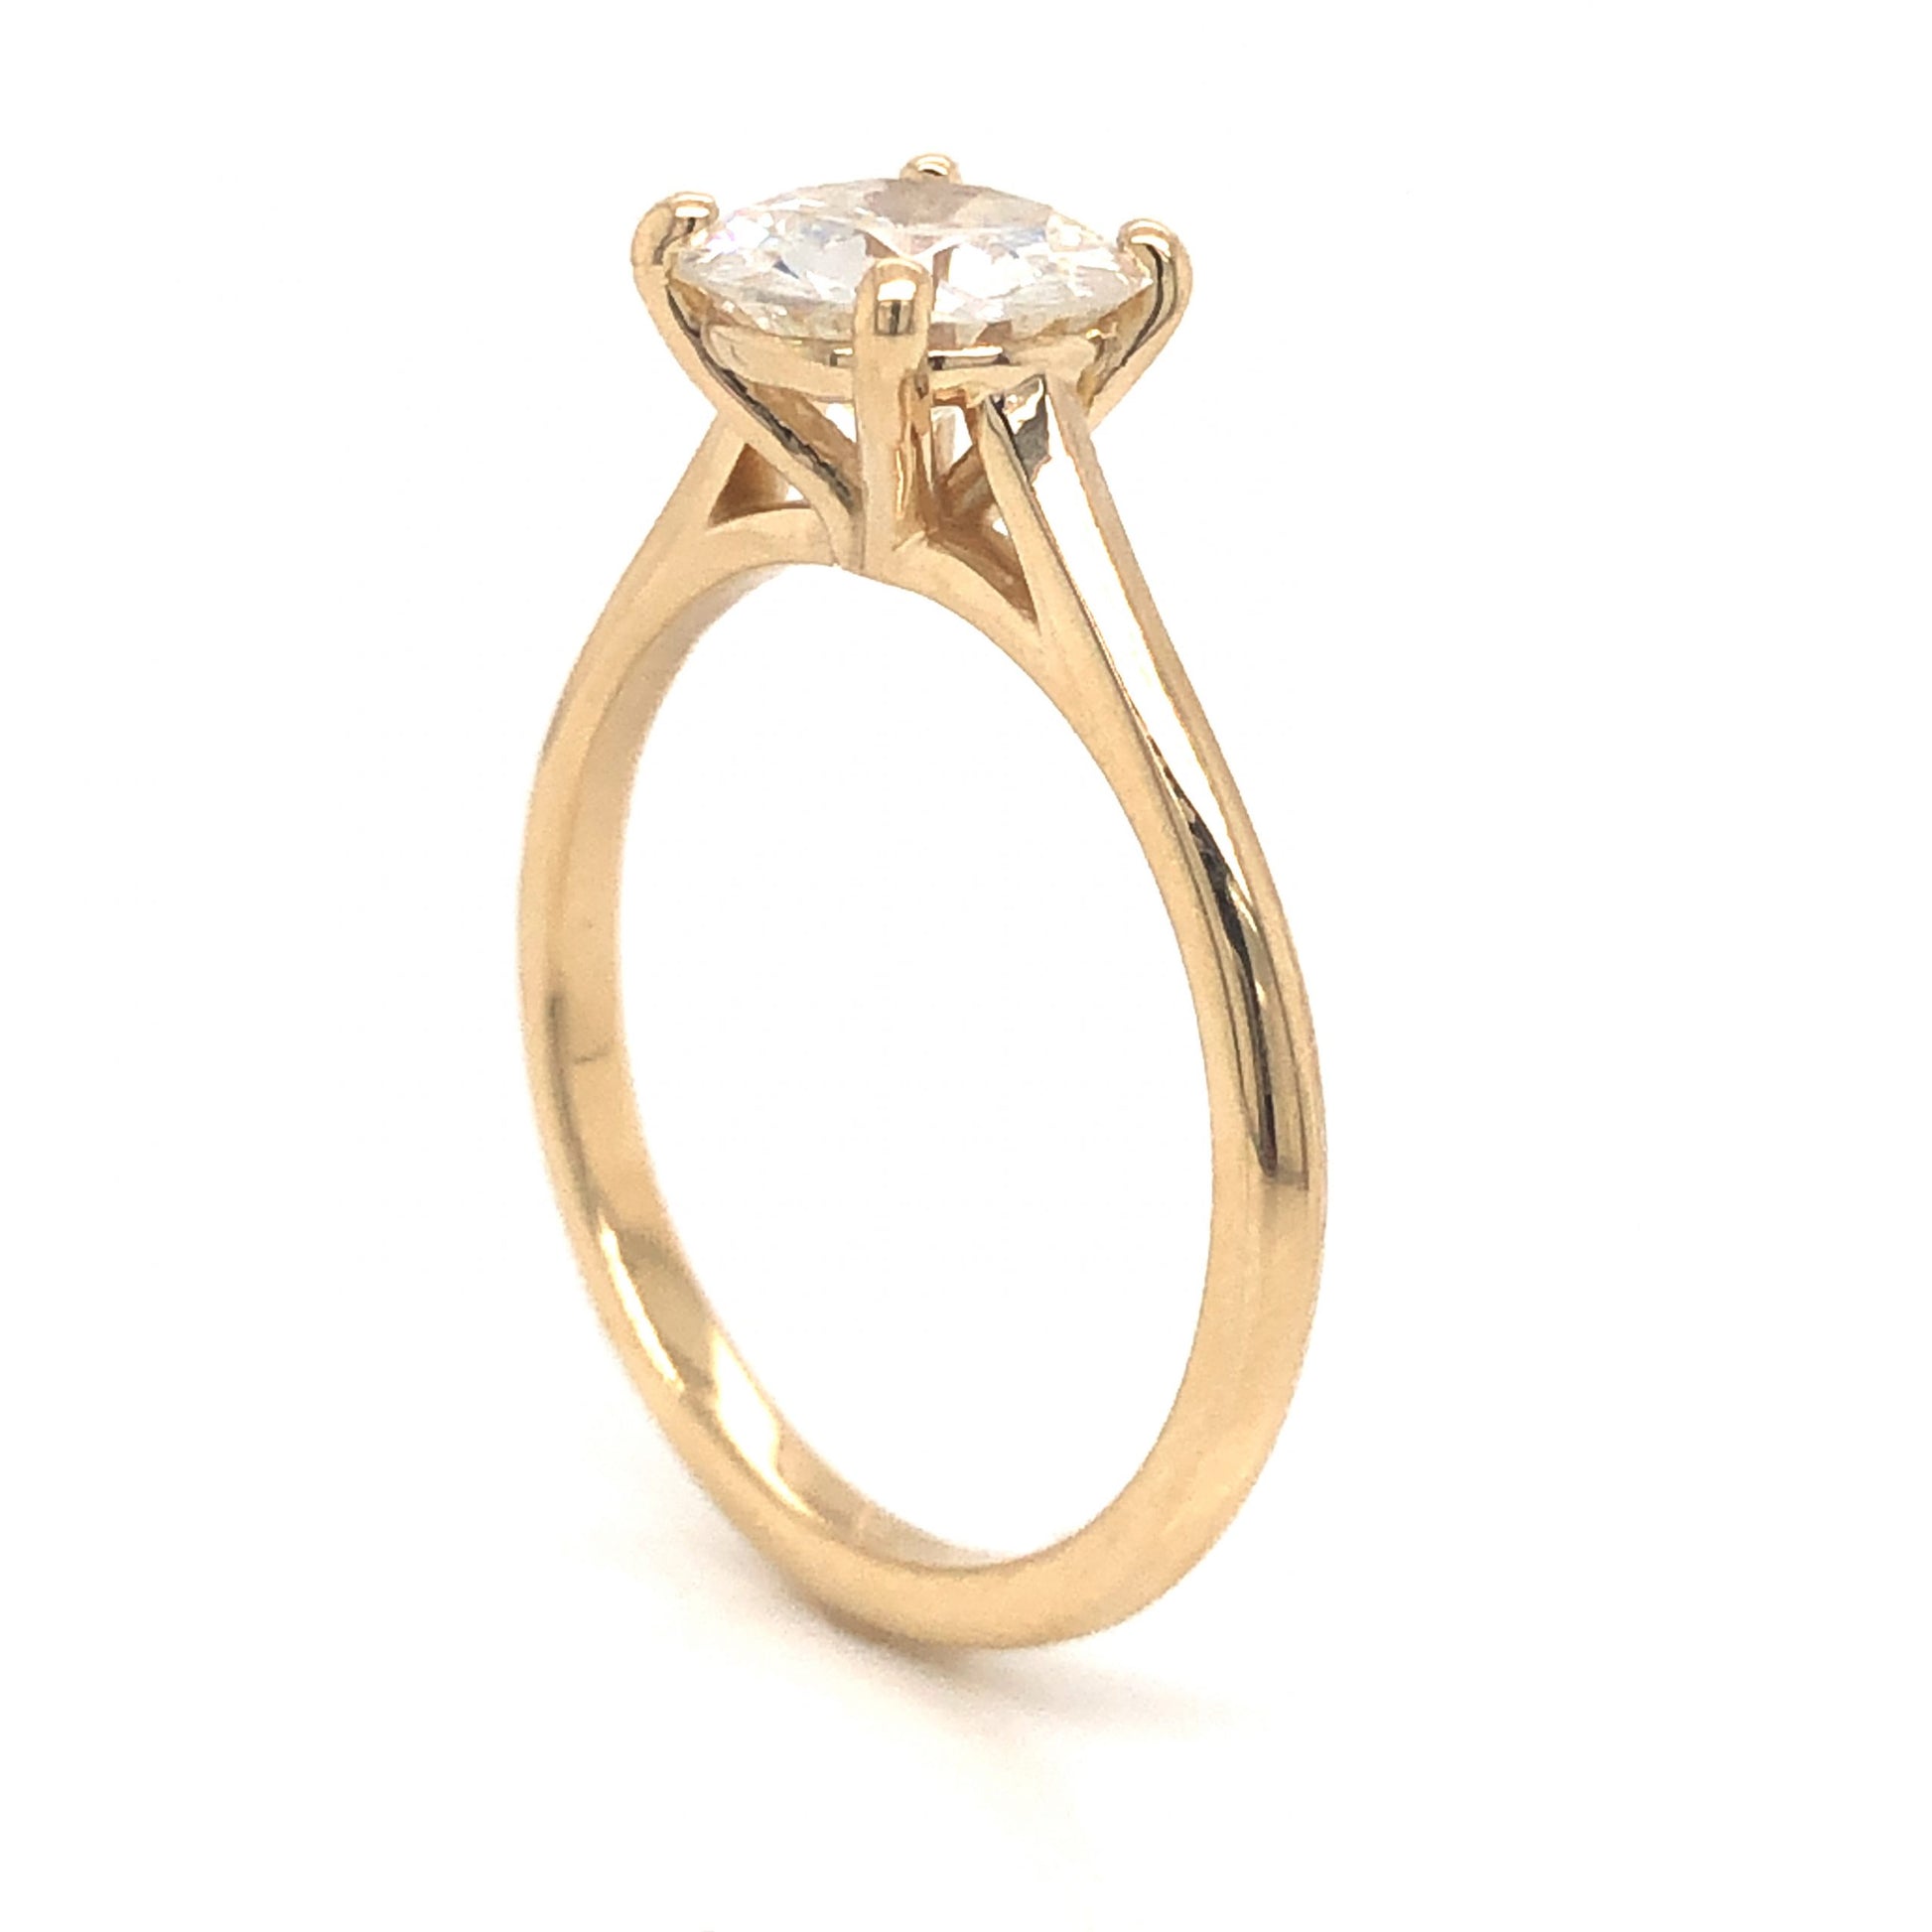 1.44 Solitaire Brilliant Cut Diamond Engagement Ring in 14K Yellow GoldComposition: 14 Karat Yellow Gold Ring Size: 7 Total Diamond Weight: 1.44ct Total Gram Weight: 2.8 g Inscription: 14k 
      